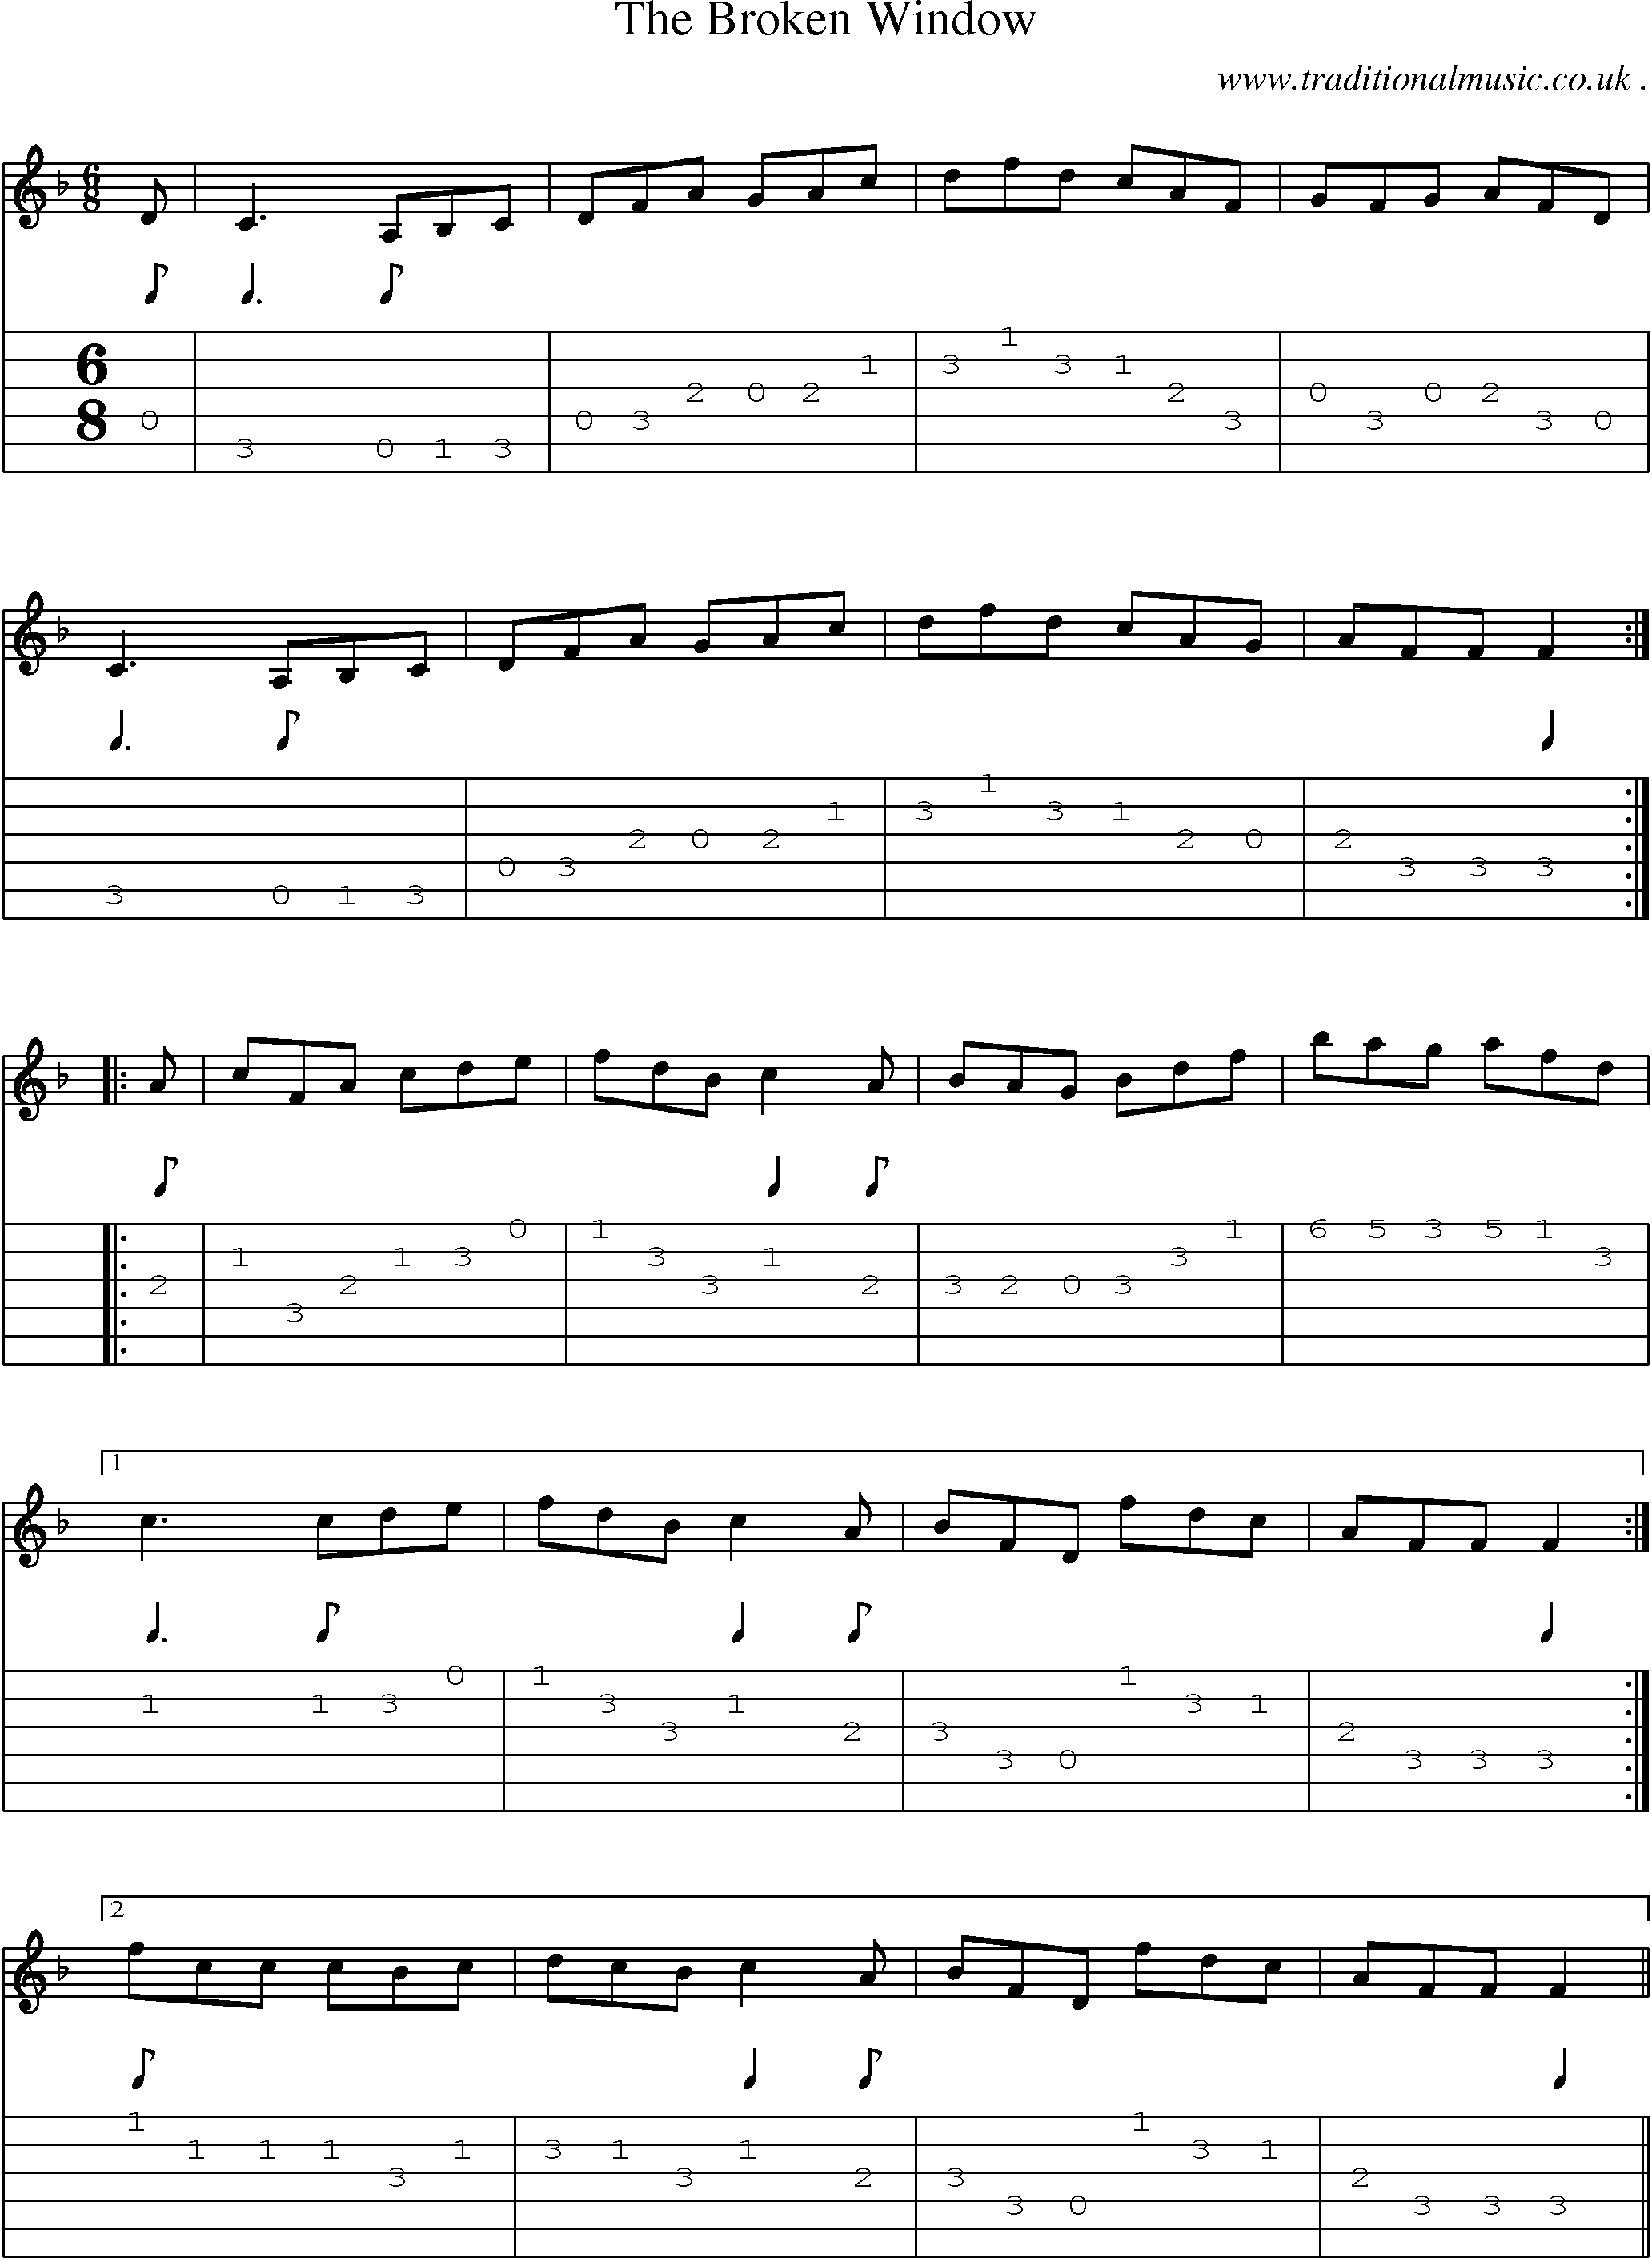 Sheet-Music and Guitar Tabs for The Broken Window